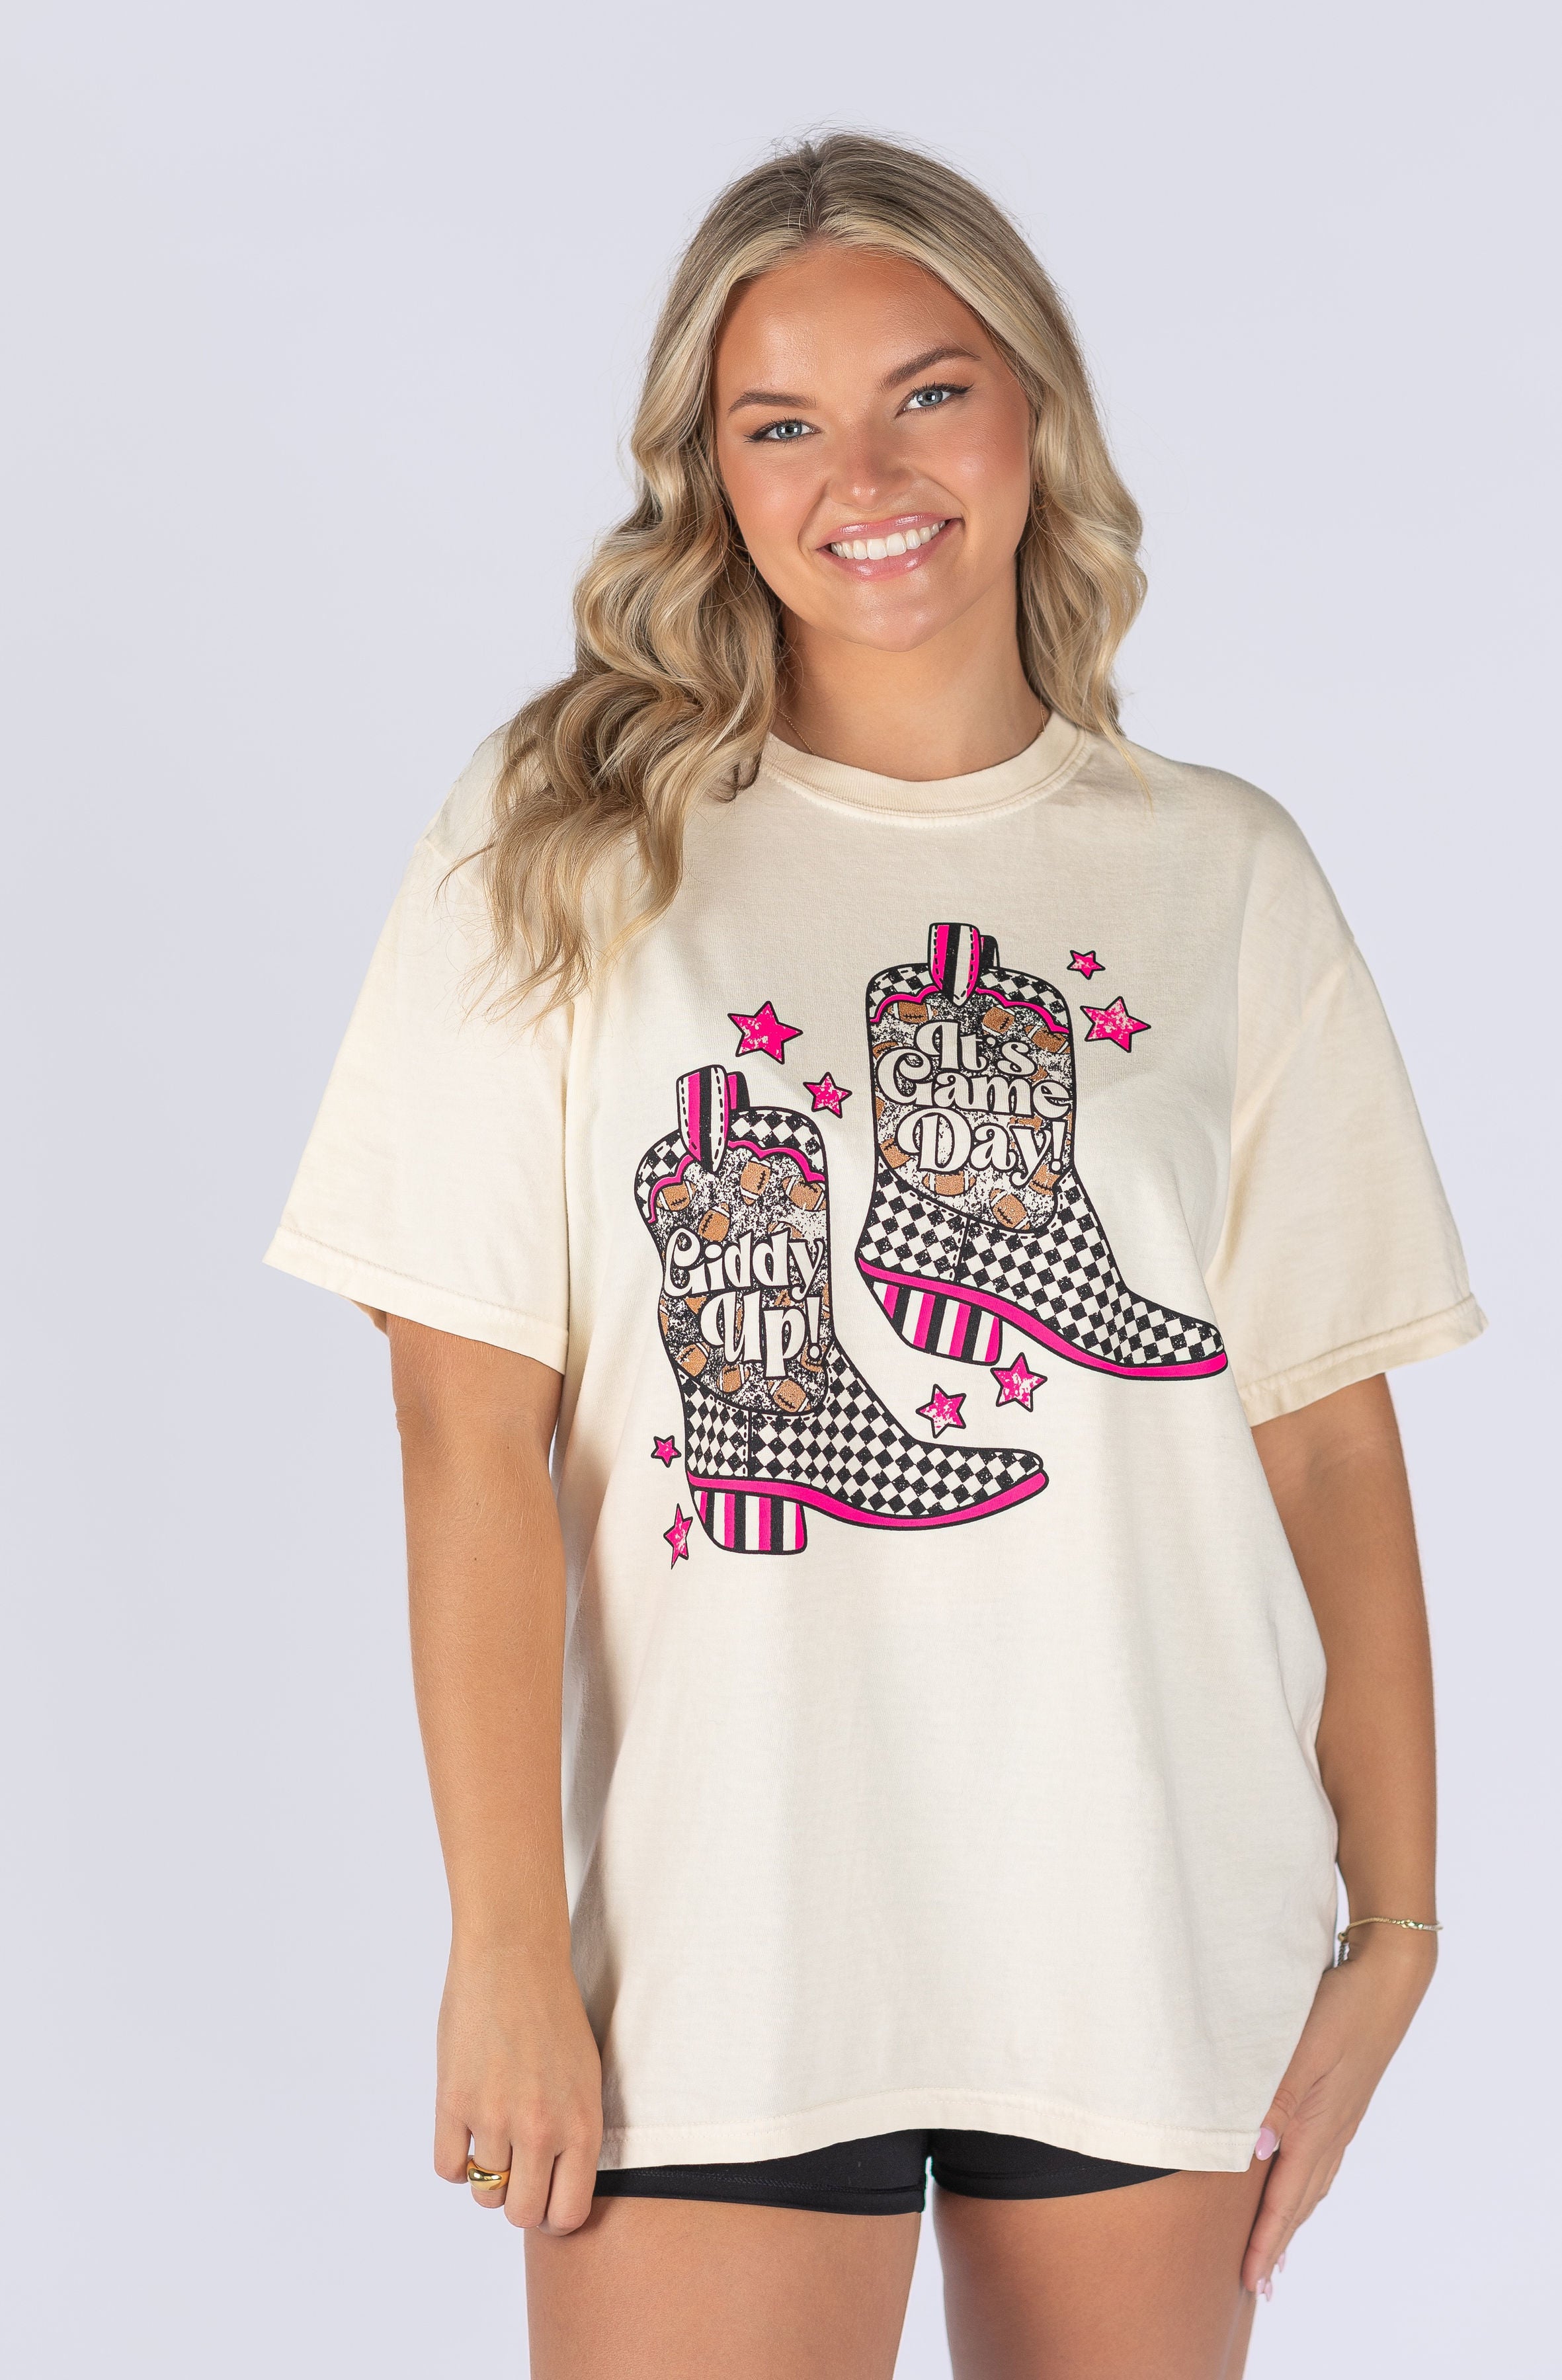 Giddy Up Boots Tee